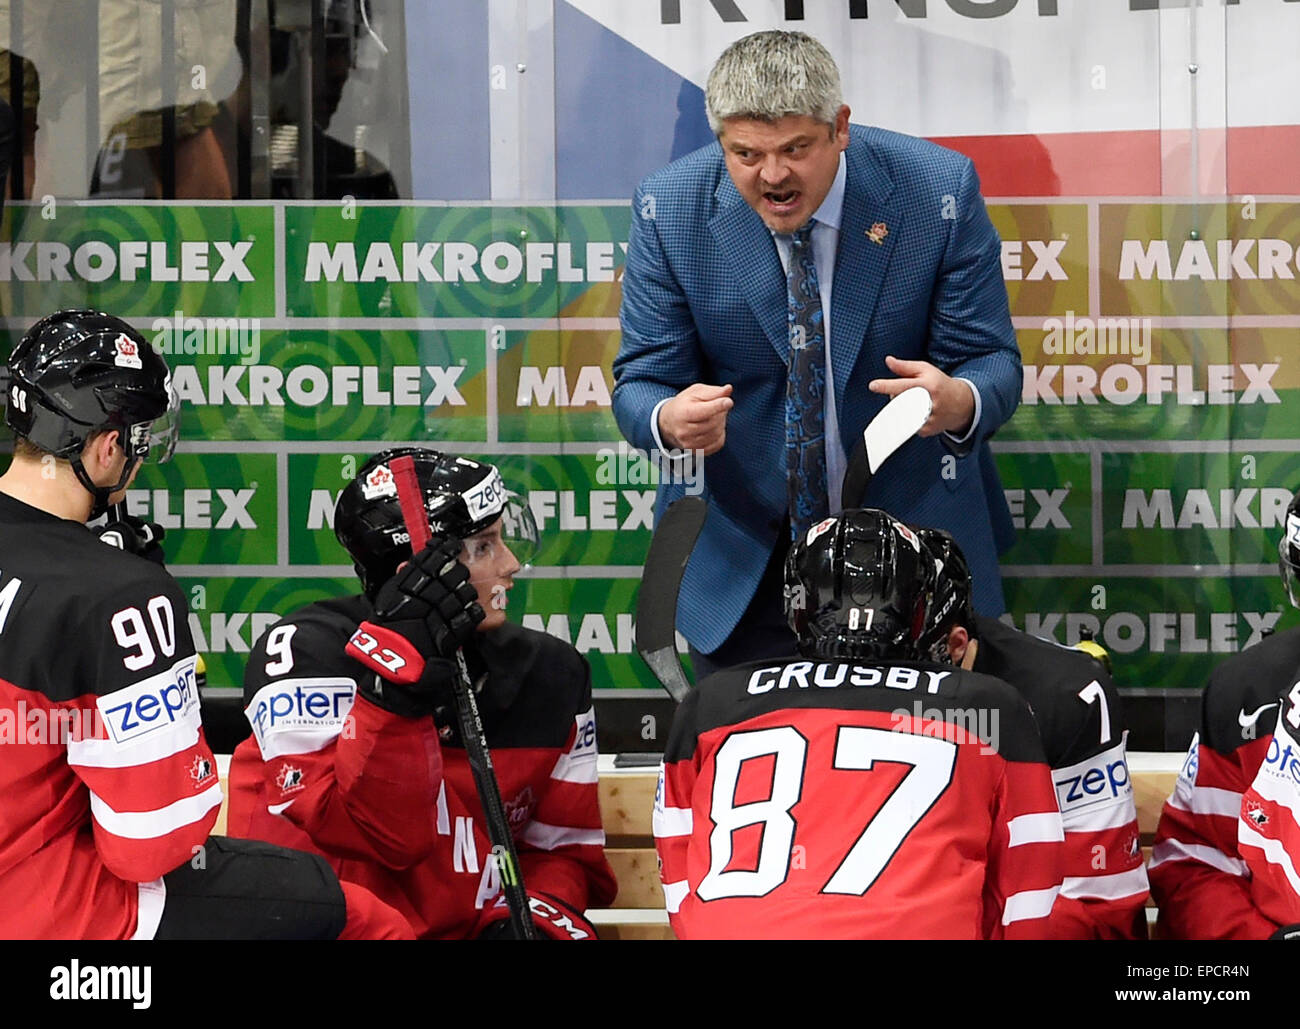 Prague, Czech Republic. 16th May, 2015. Canadian head coach Todd McLellan speaks to his players during the Ice Hockey World Championships semifinal match Canada vs Czech Republic in Prague, Czech Republic, May 16, 2015. © Roman Vondrous/CTK Photo/Alamy Live News Stock Photo